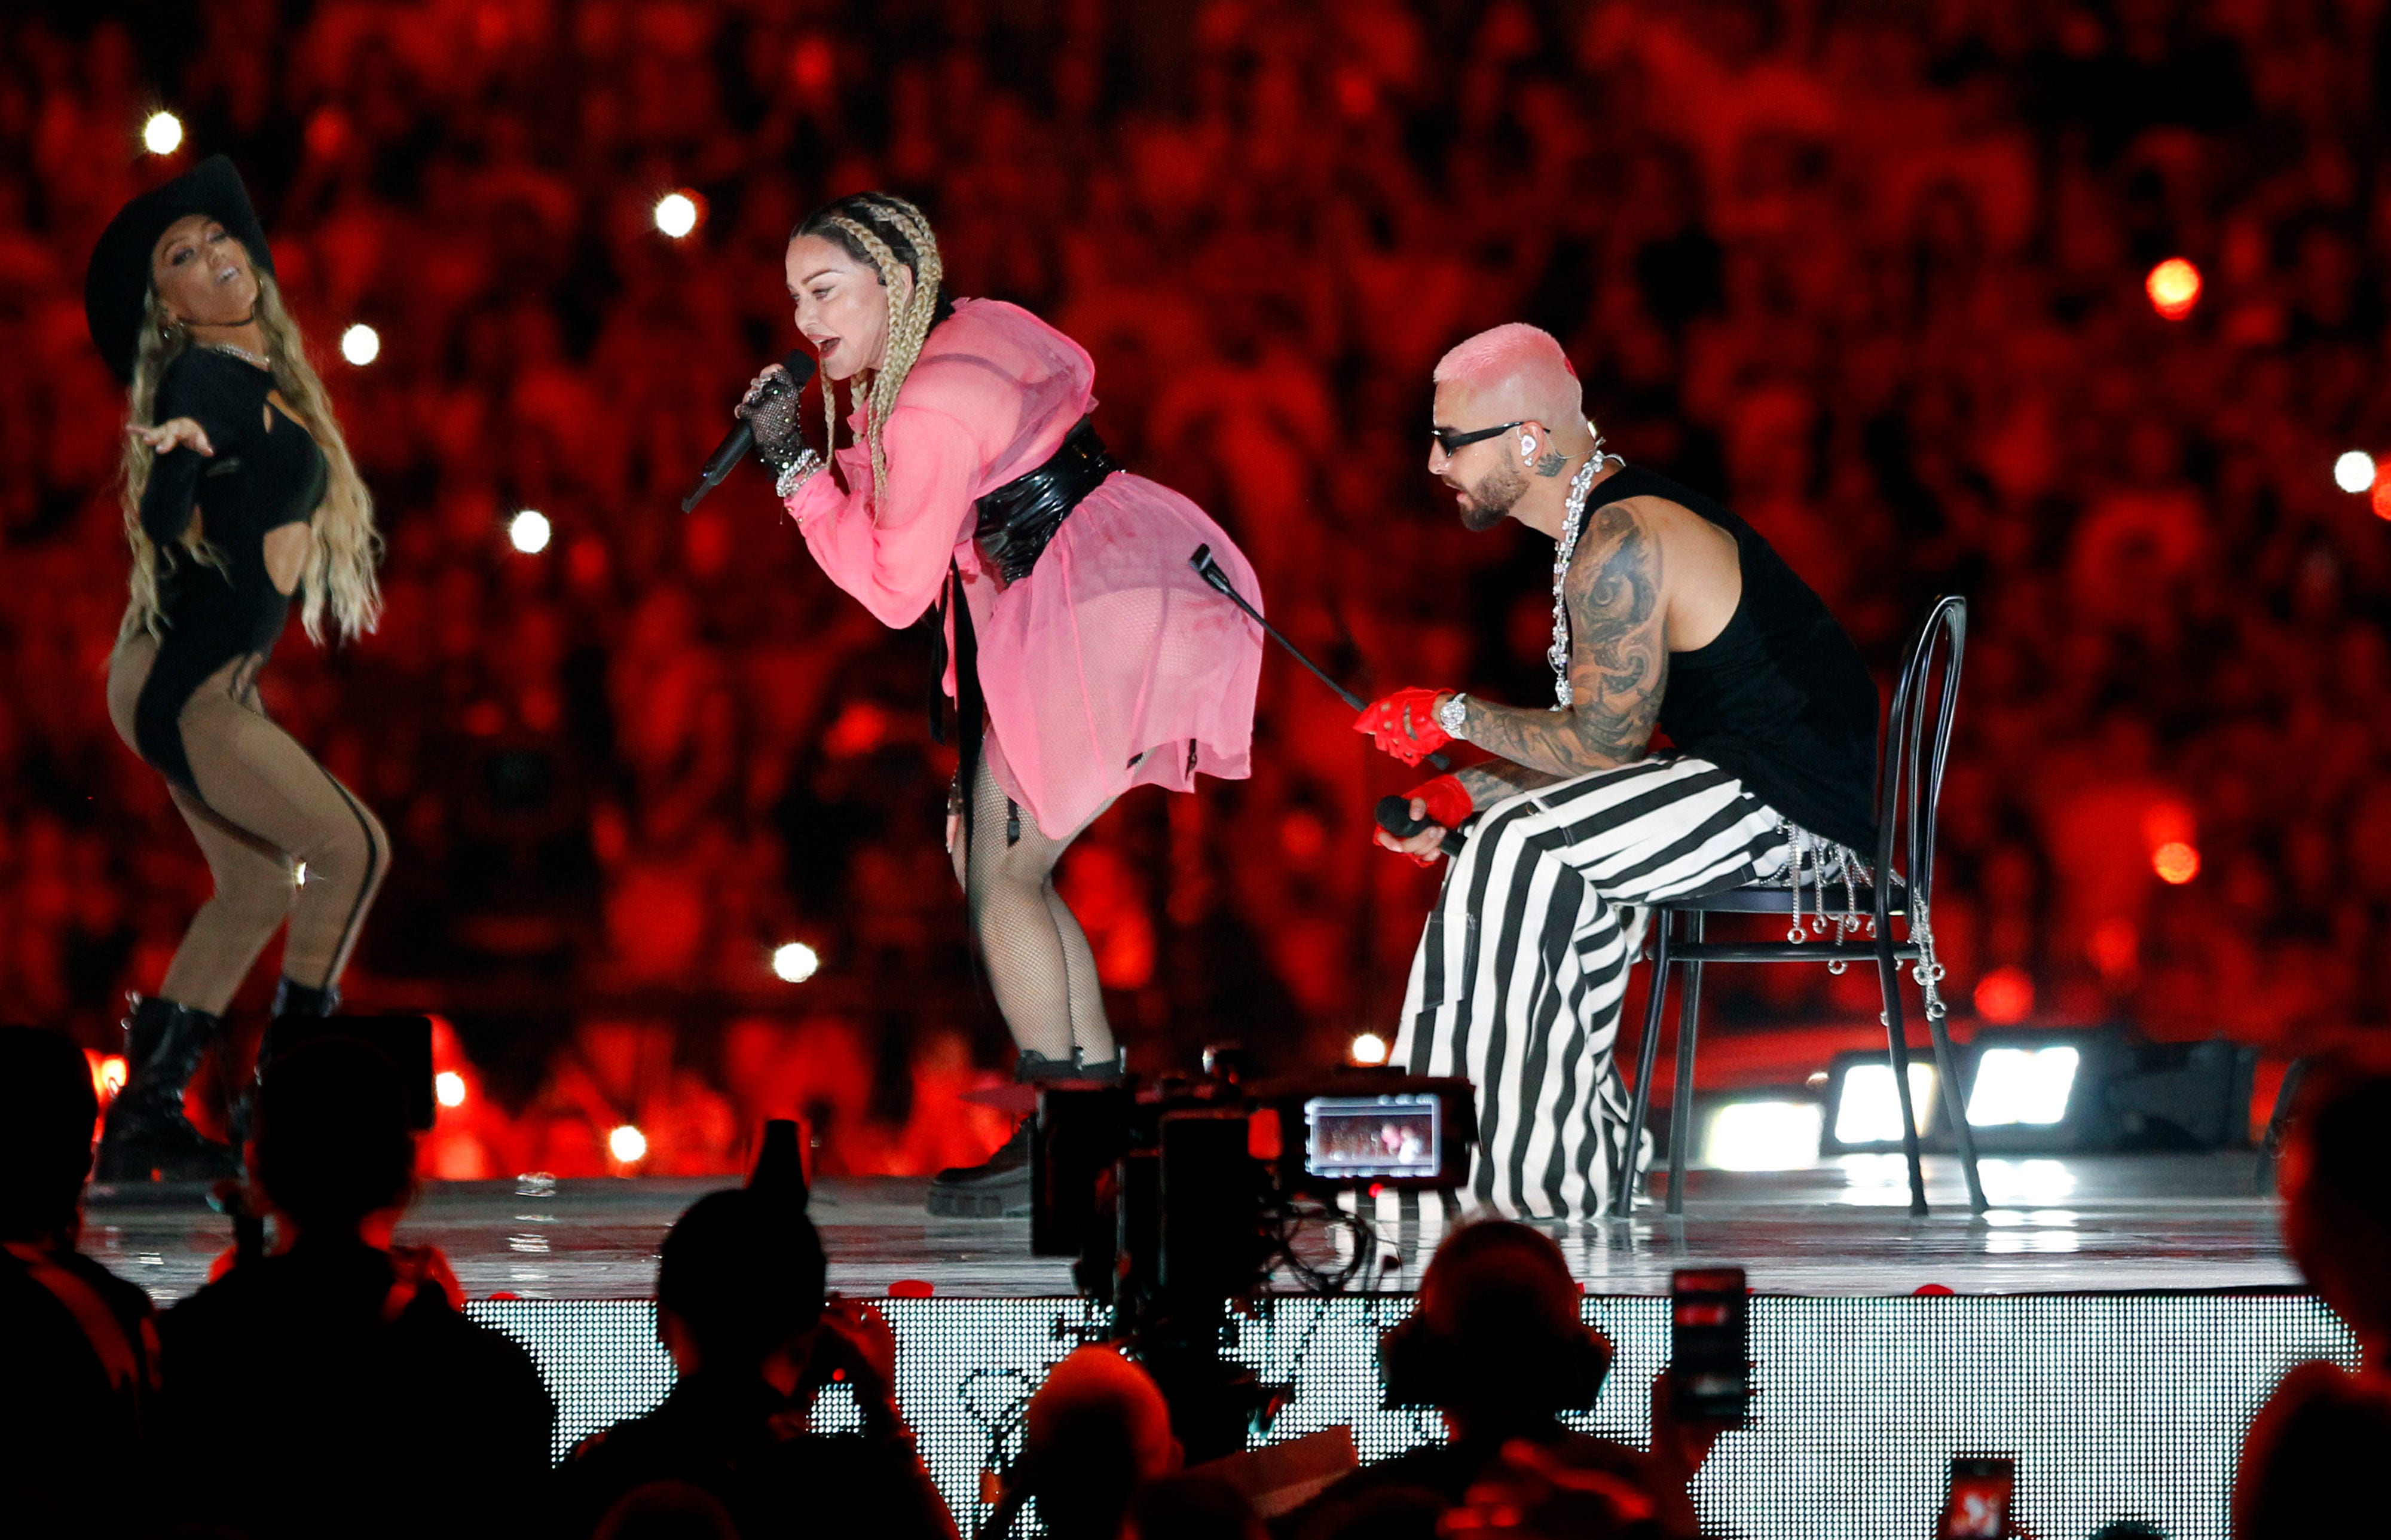 Madonna, pictured here performing with Colombian singer Maluma, has never shied away from her sexuality. (Fredy Builes)